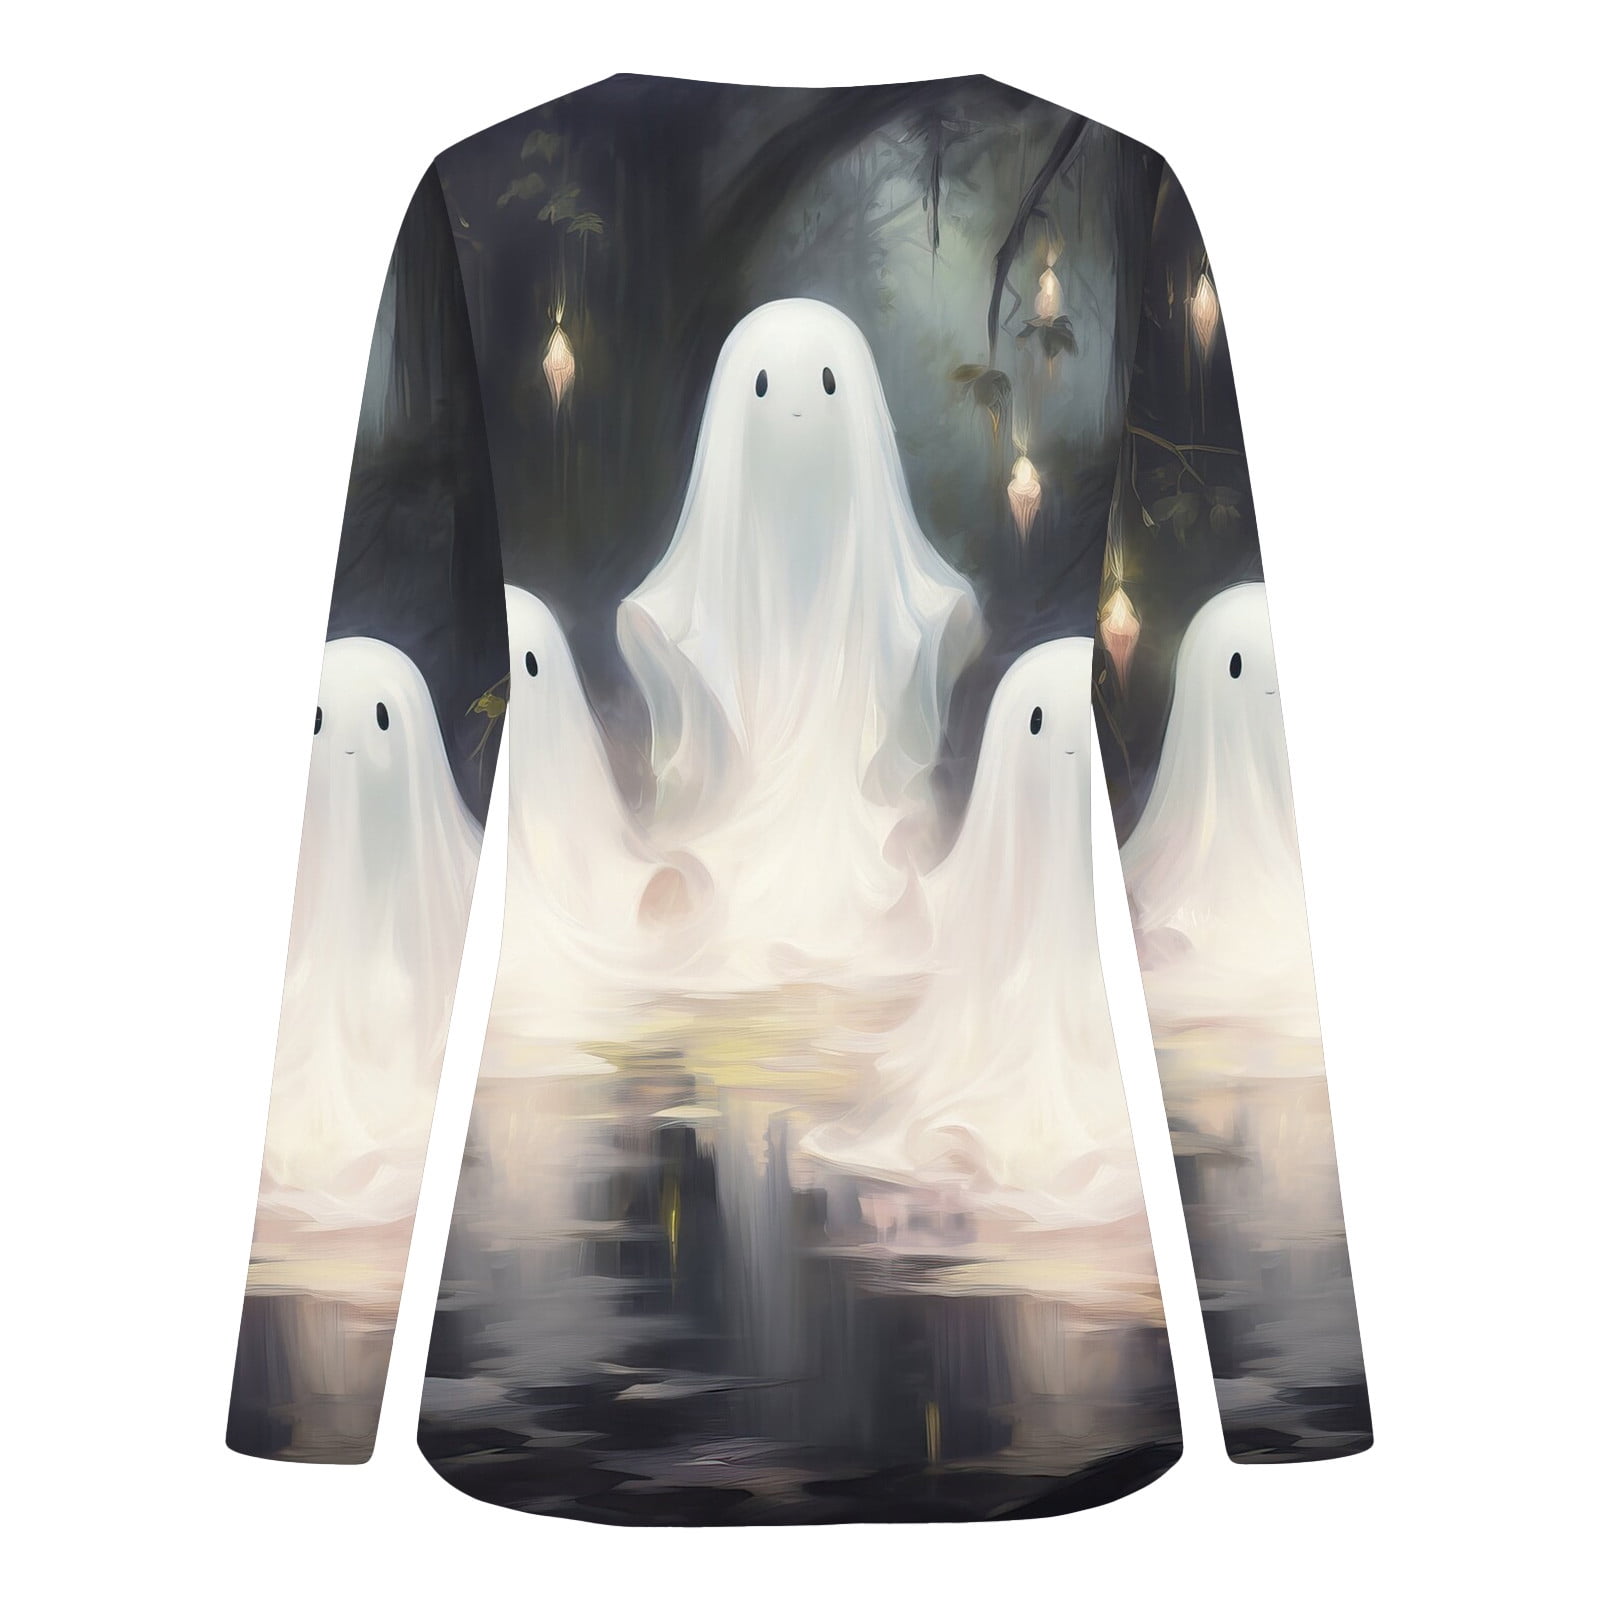 Dyegold Halloween Sweaters Teen Girls Cute Funny Graphic Shirt